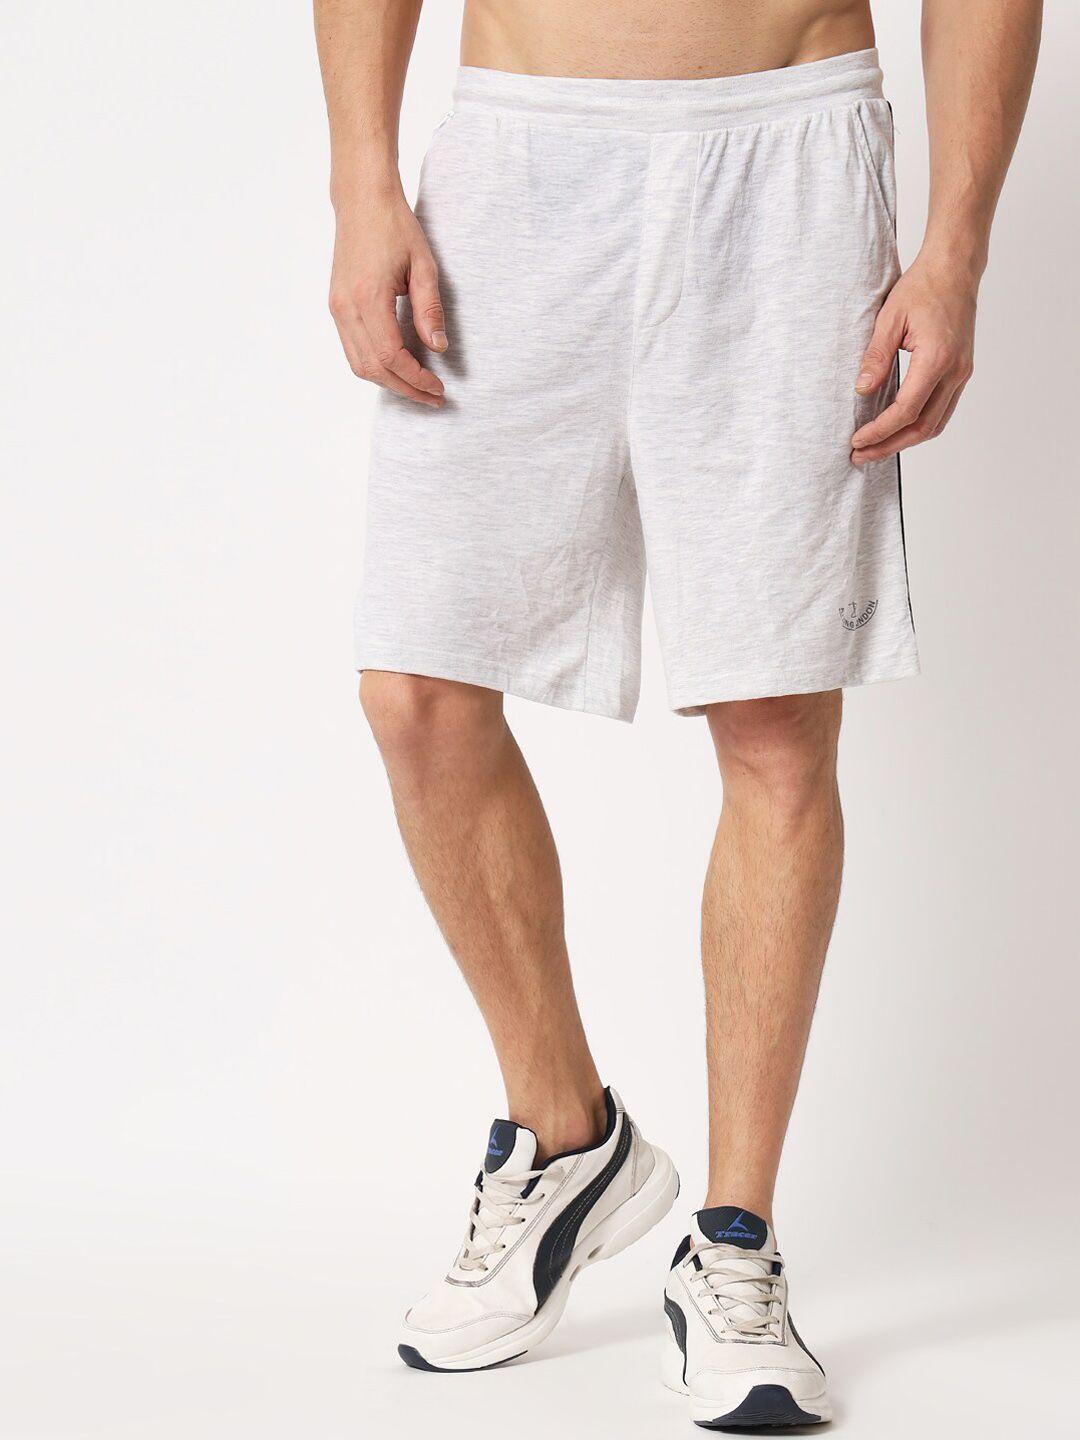 aazing-london-men-white-solid-cotton-sports-shorts